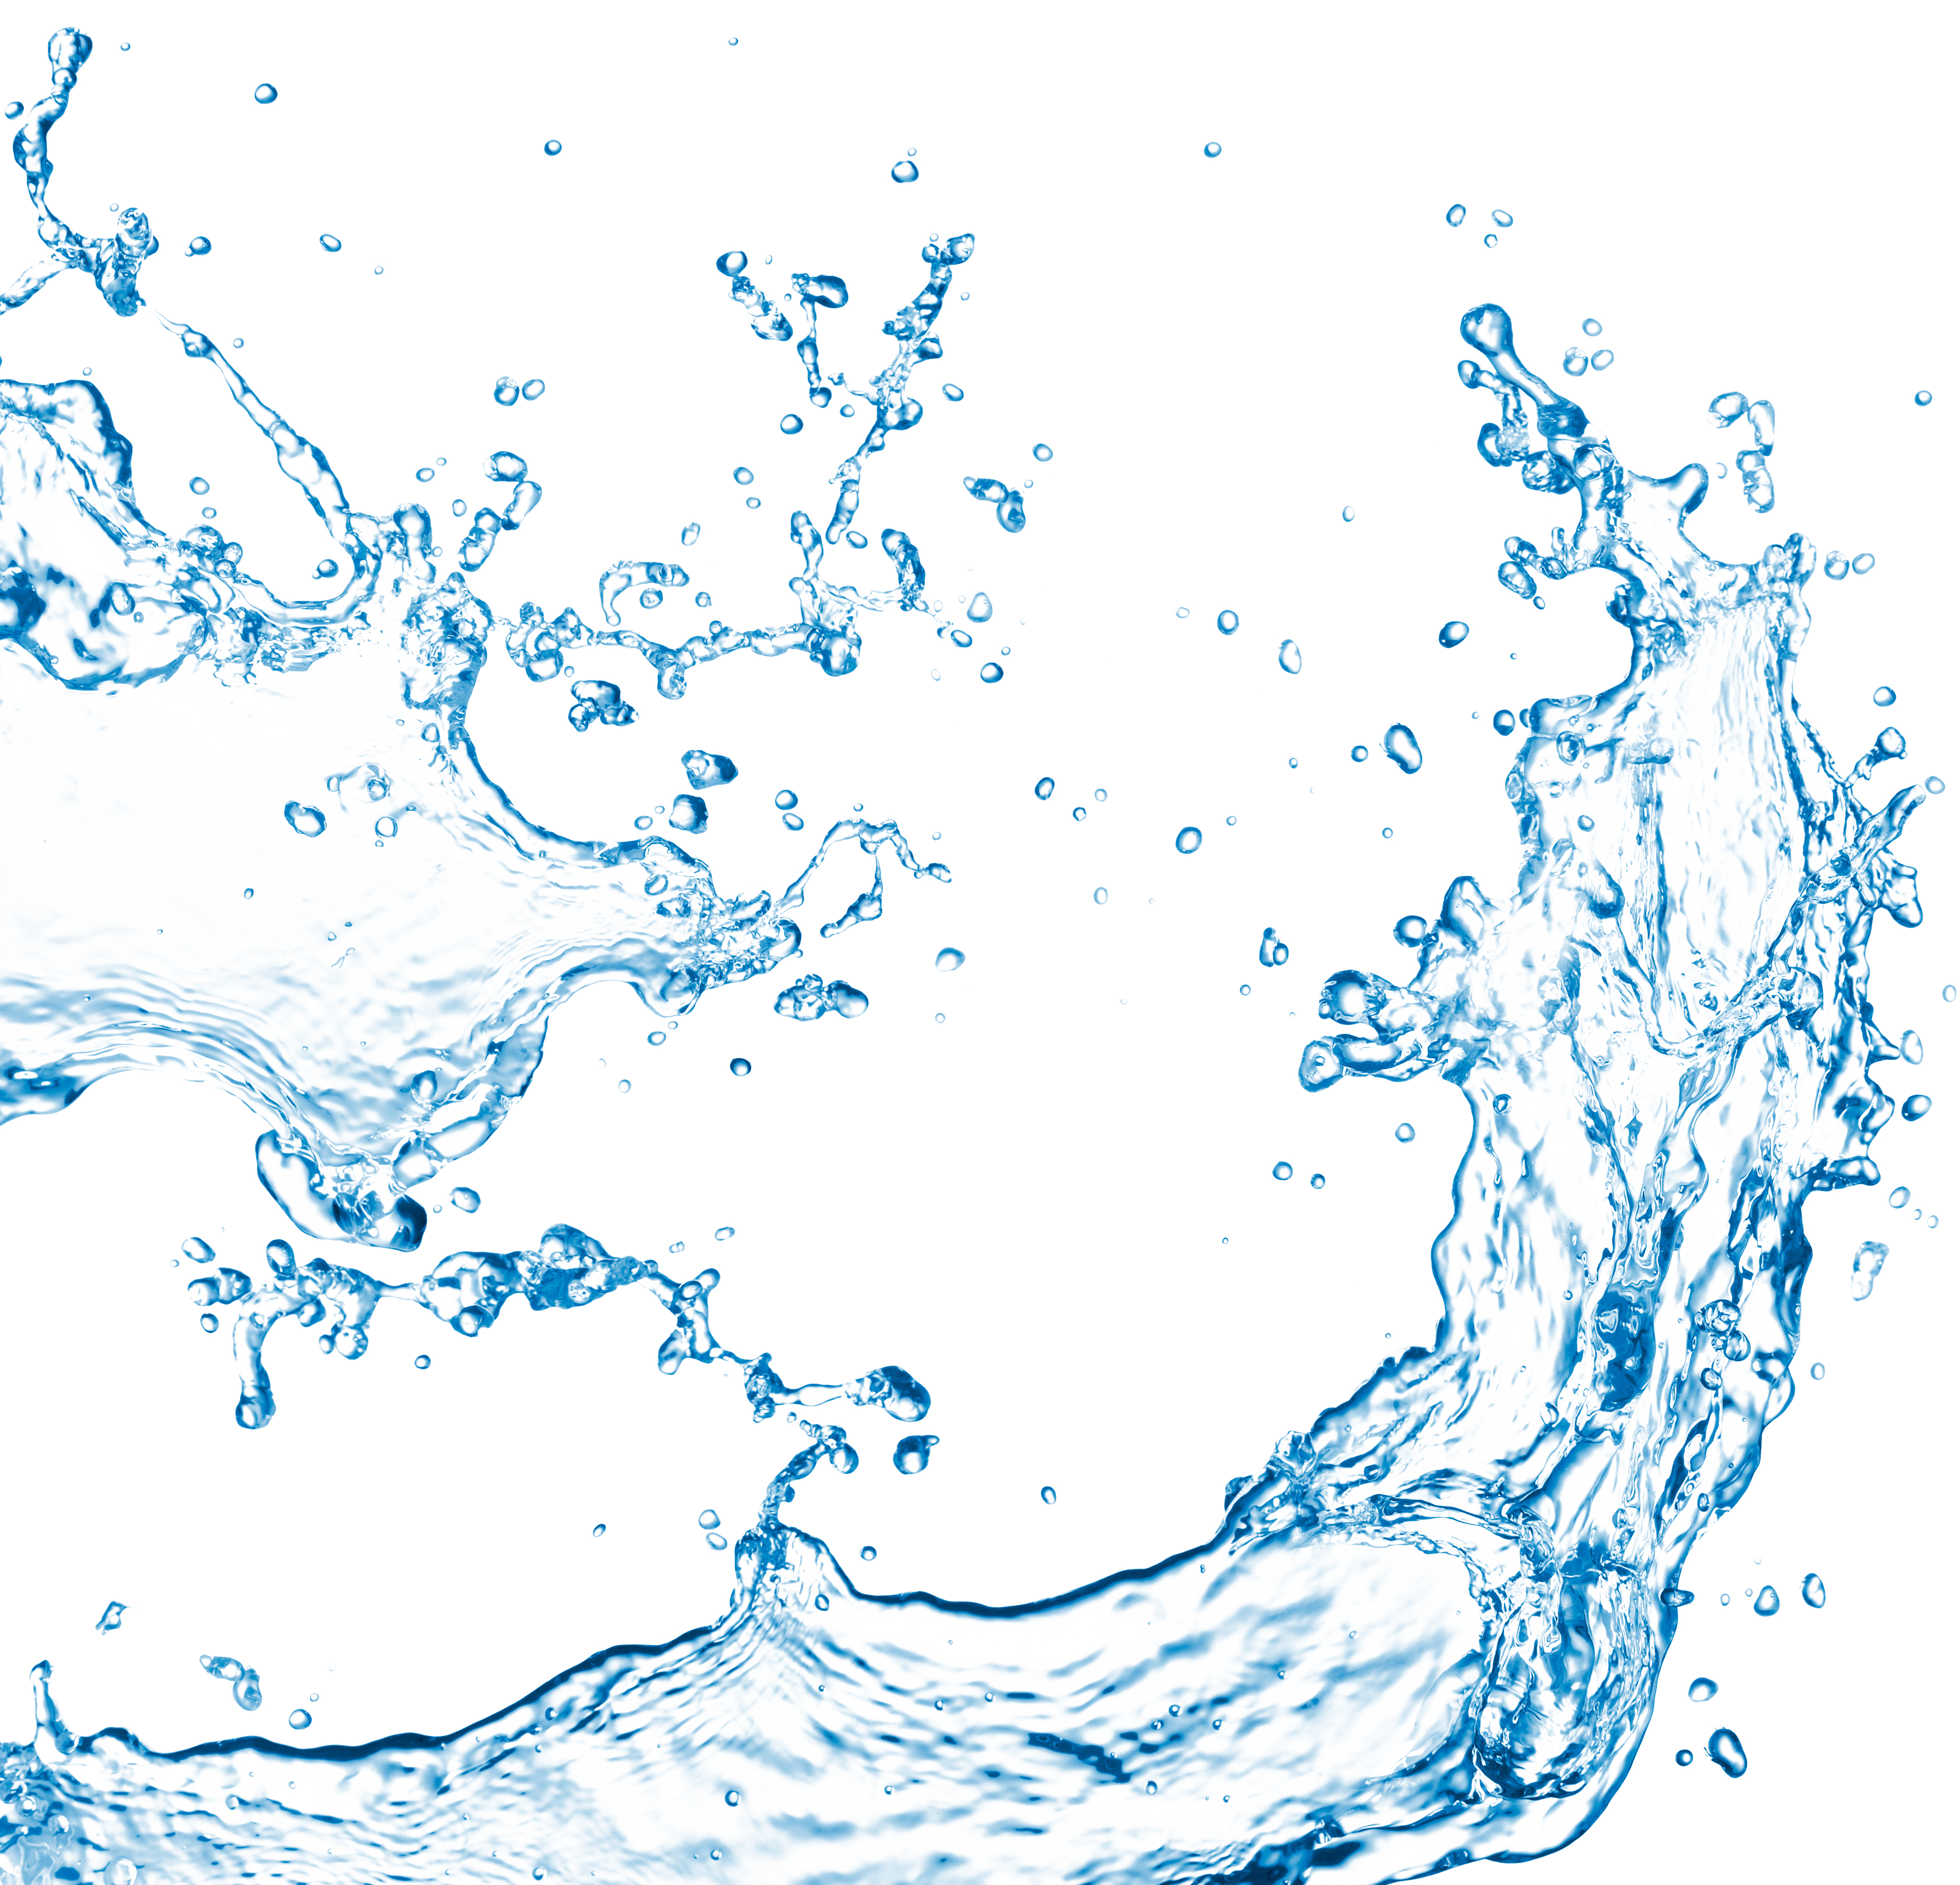 Water PNG image, free water drops PNG images download.